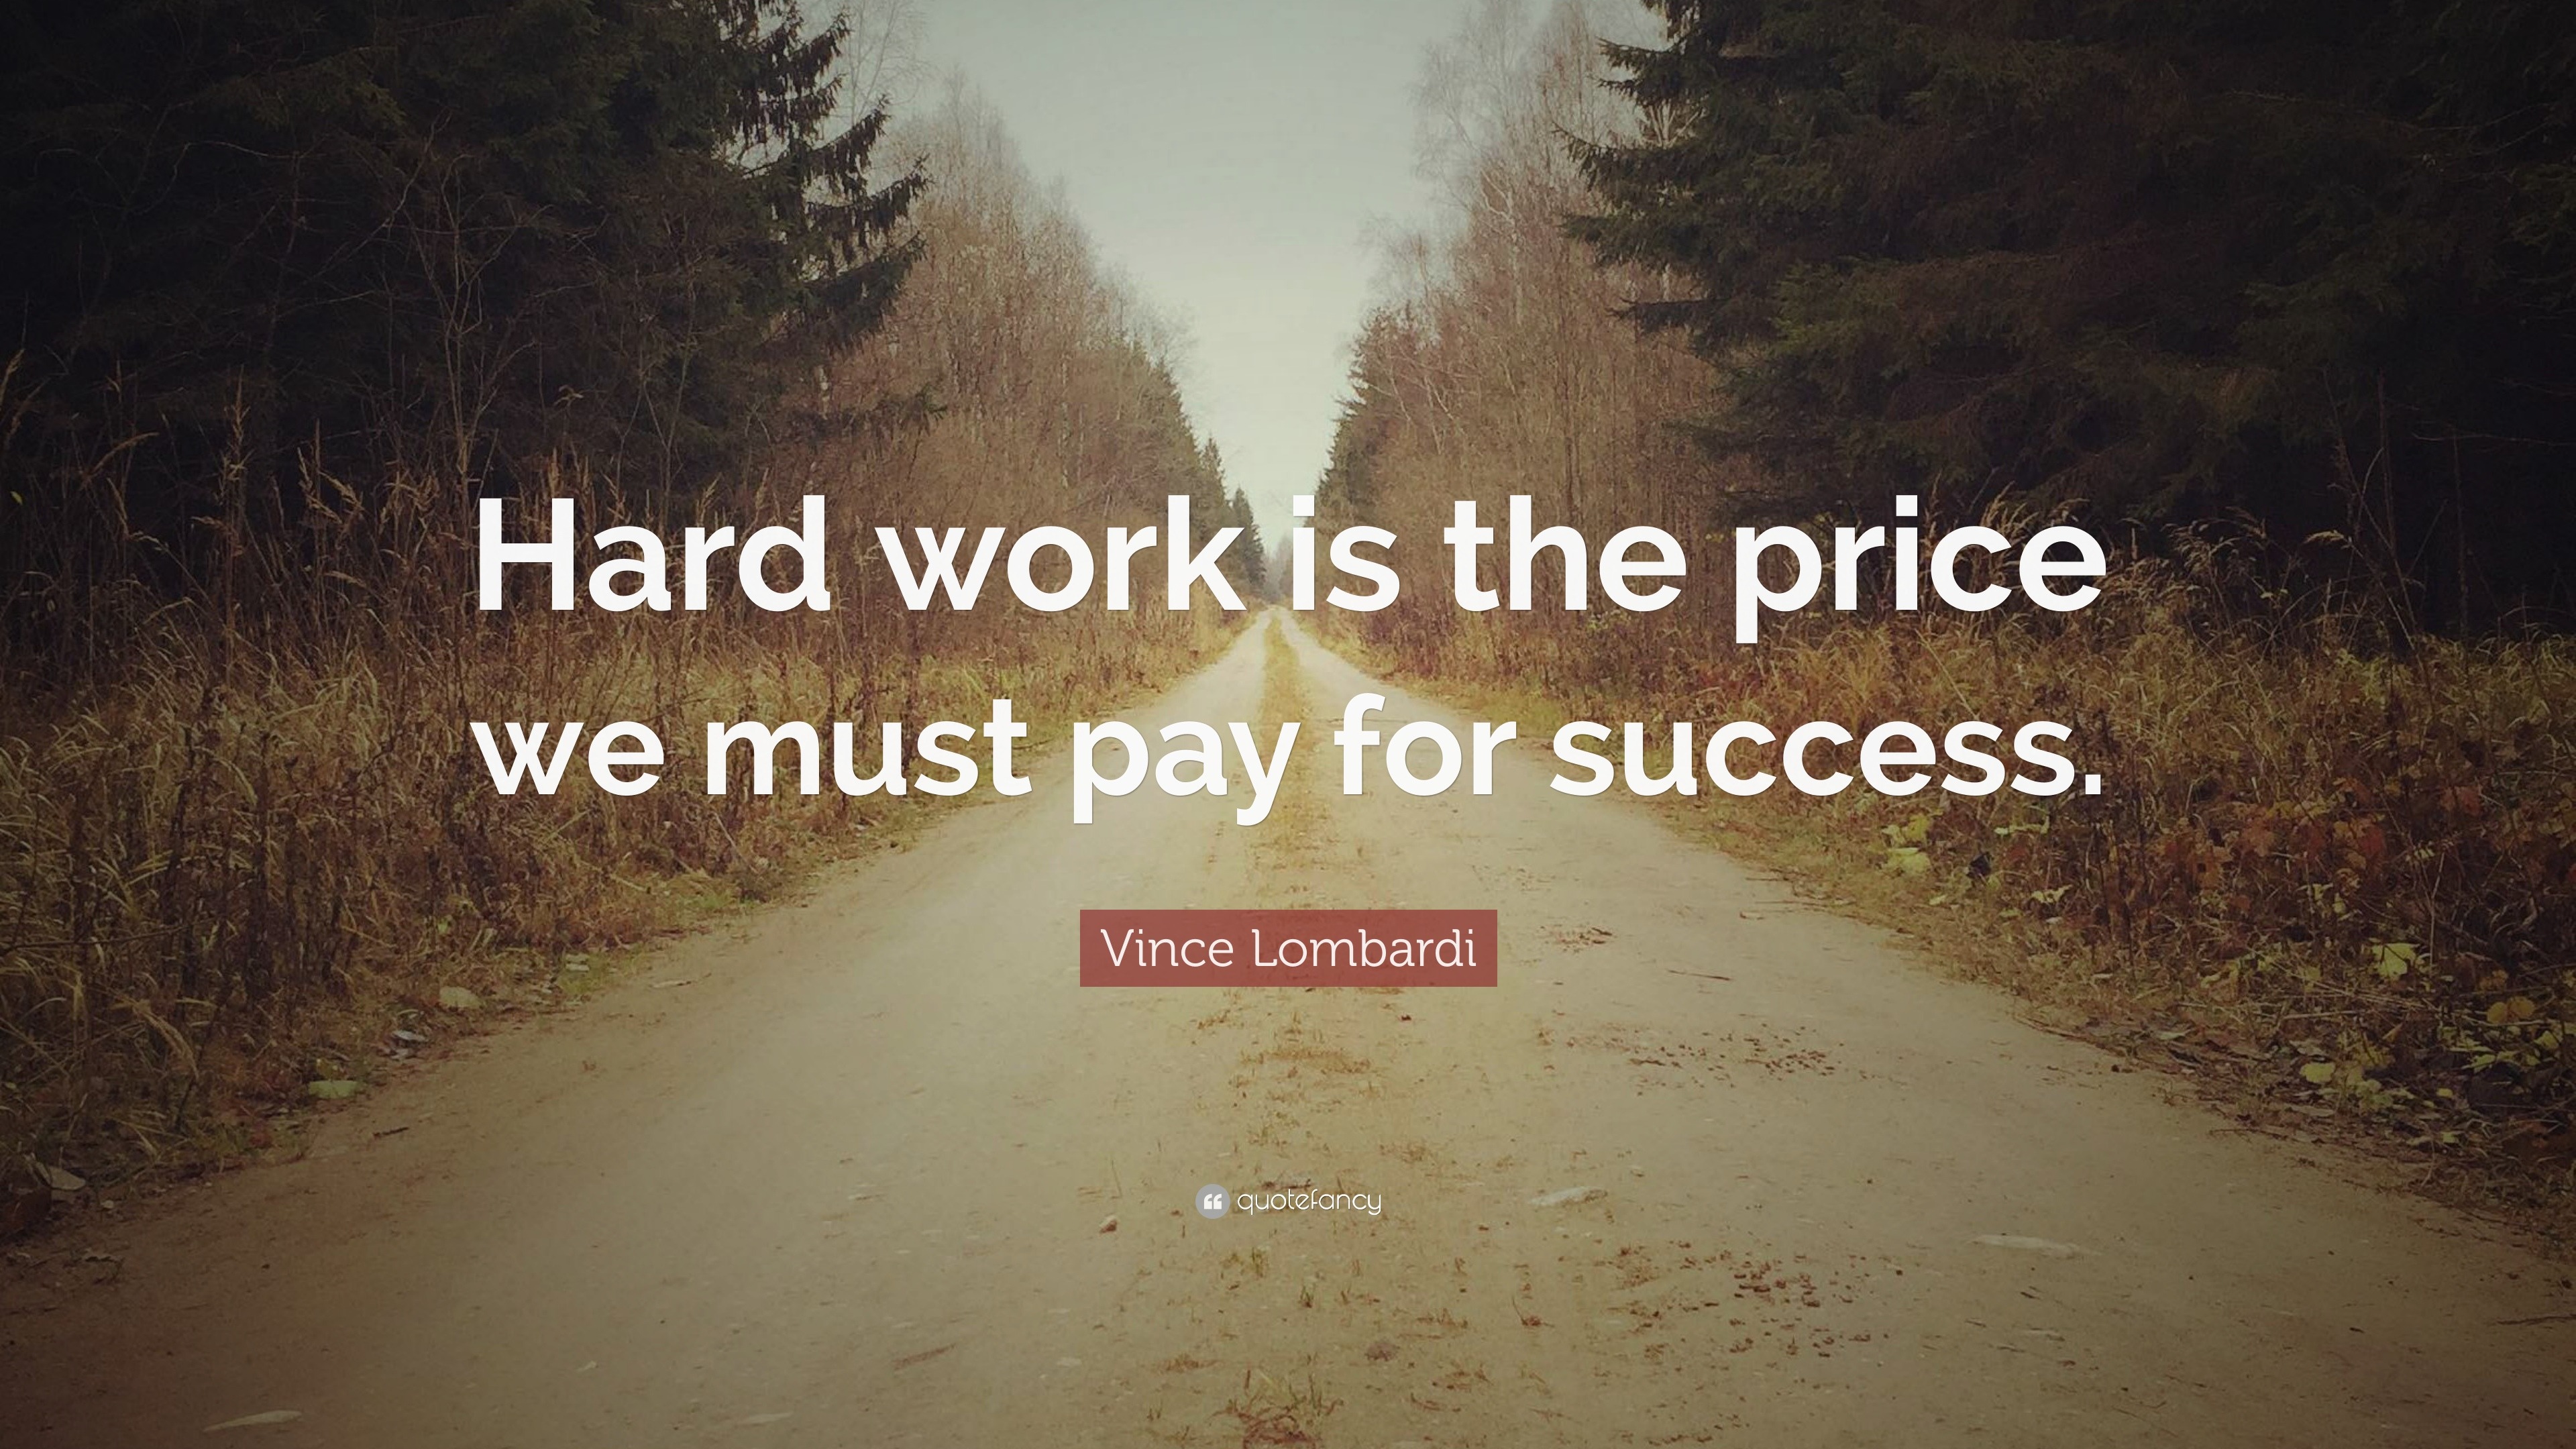 Vince Lombardi Quotes (100 wallpapers) - Quotefancy